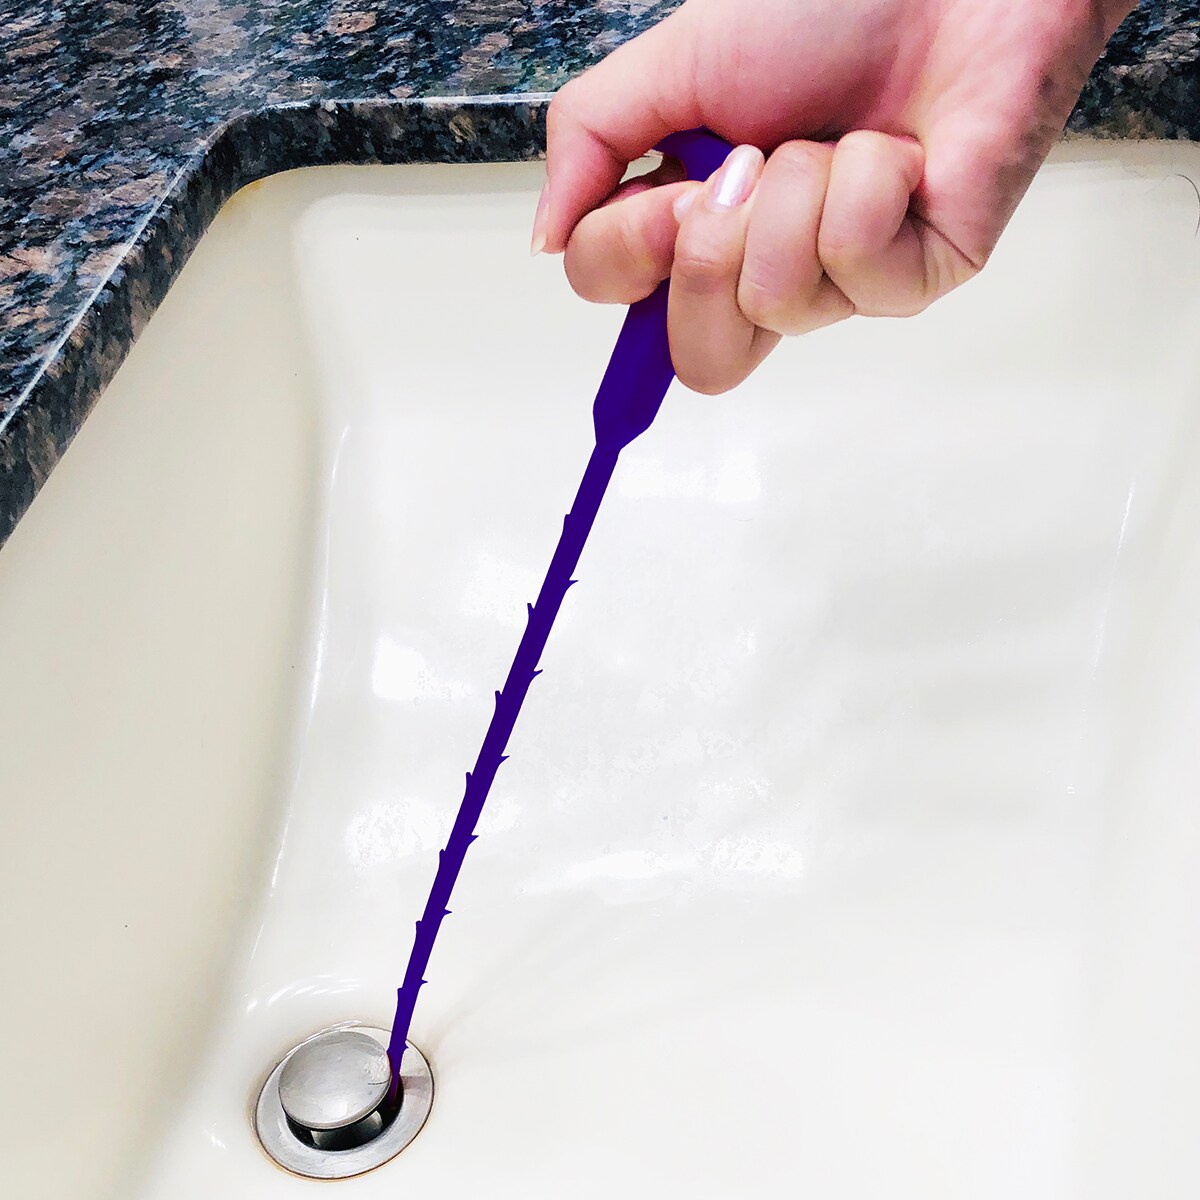 TheWorks ZIP-IT DRAIN CLEANING TOOL - Bed Bath & Beyond - 21943233